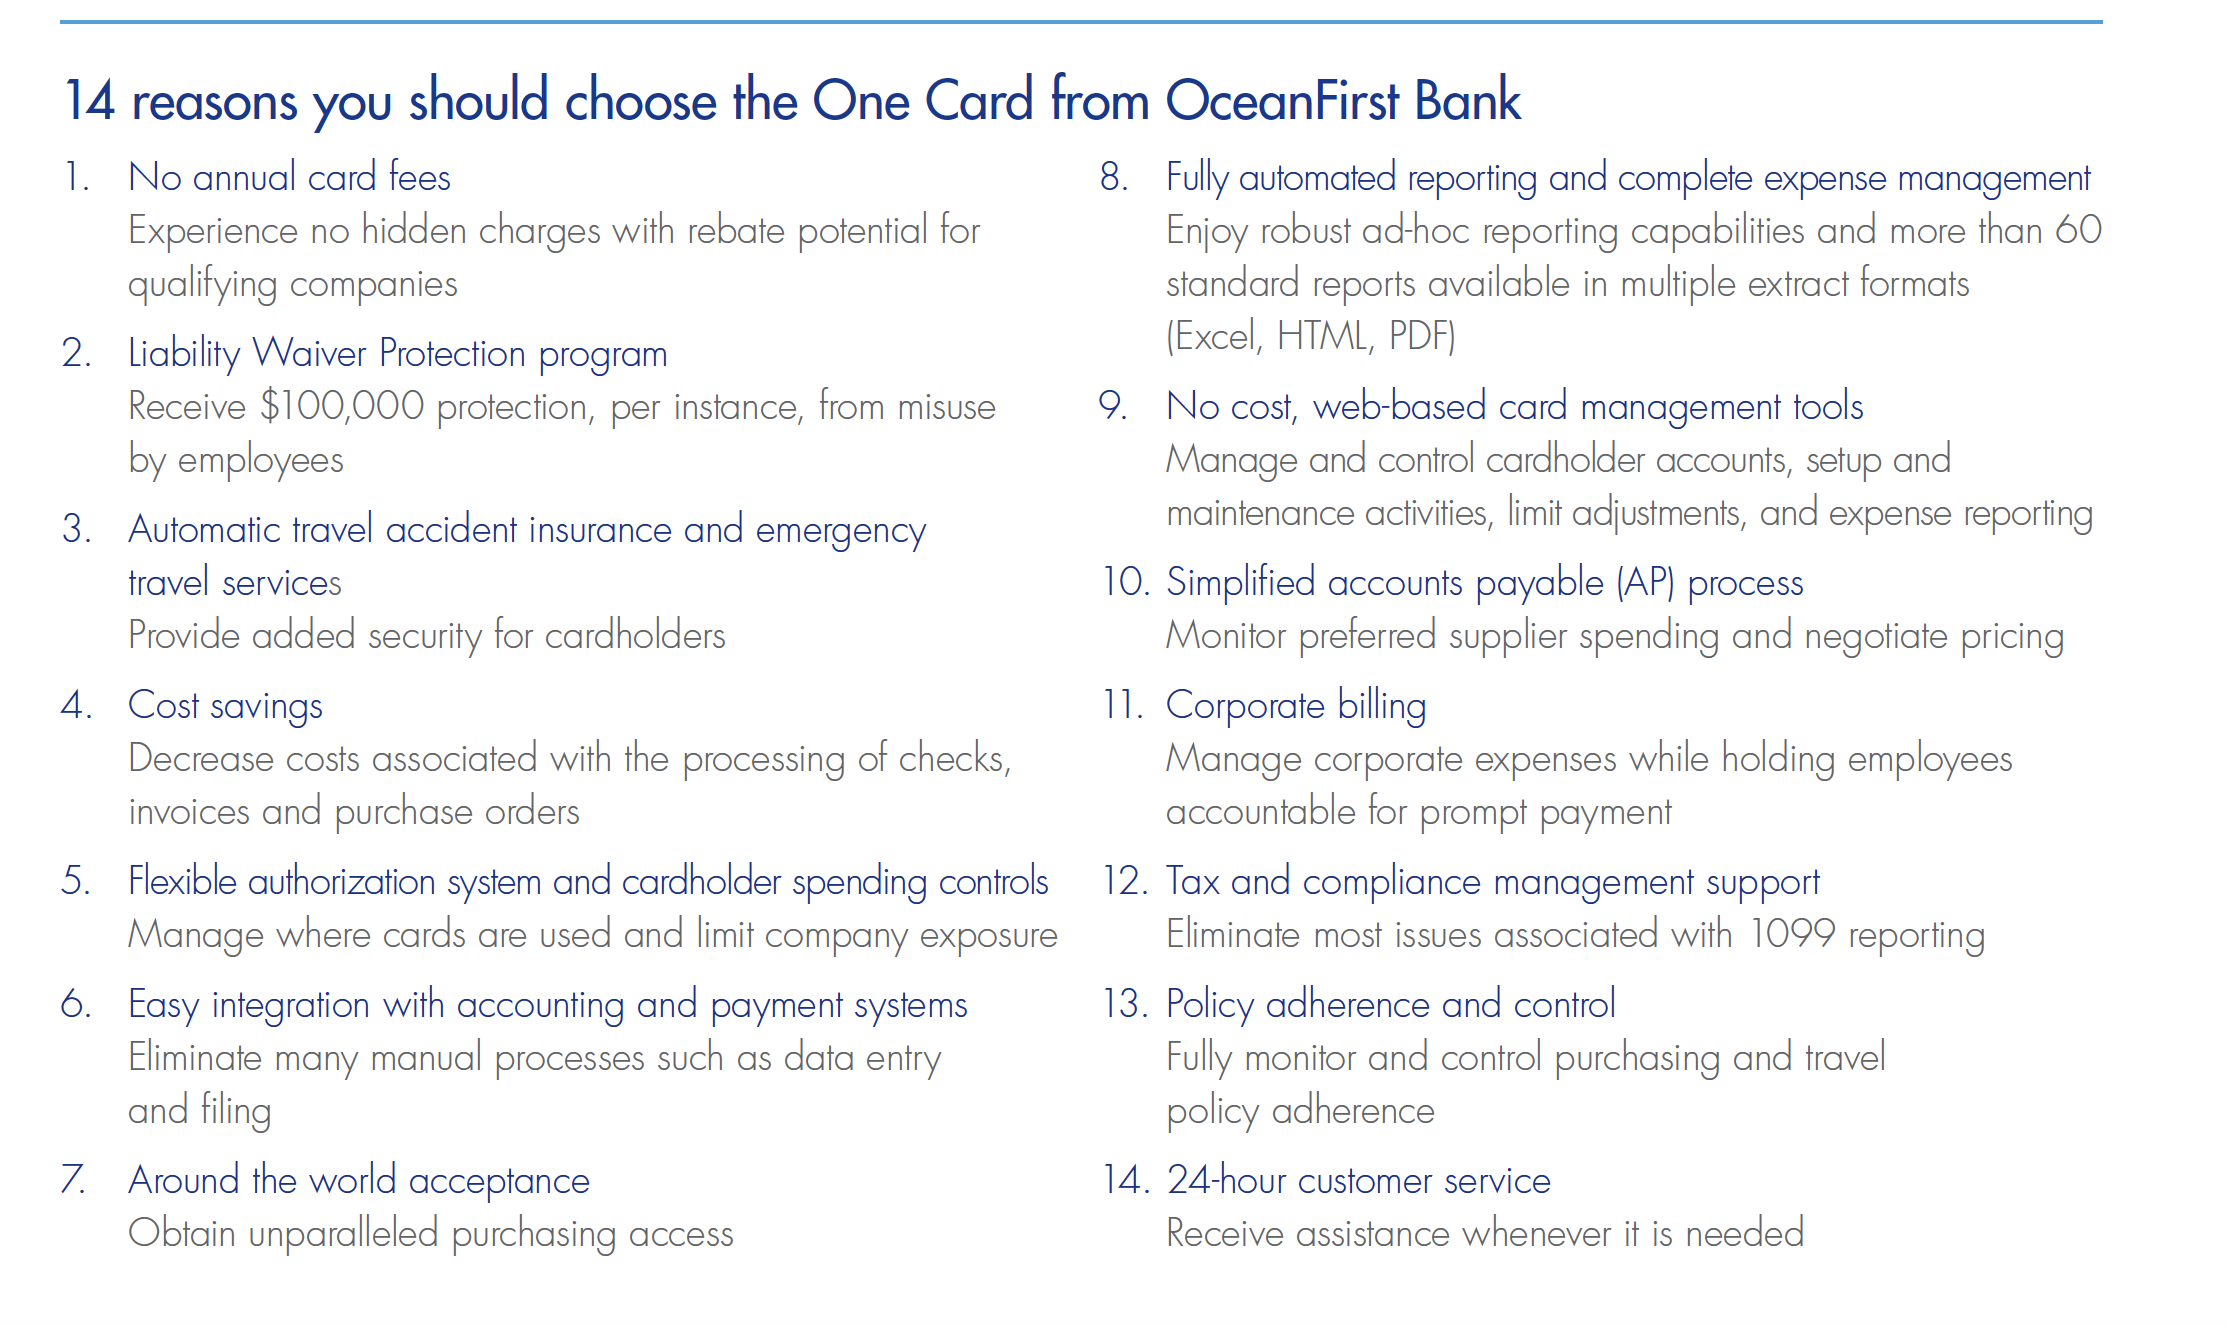 Reasons to choose One Card